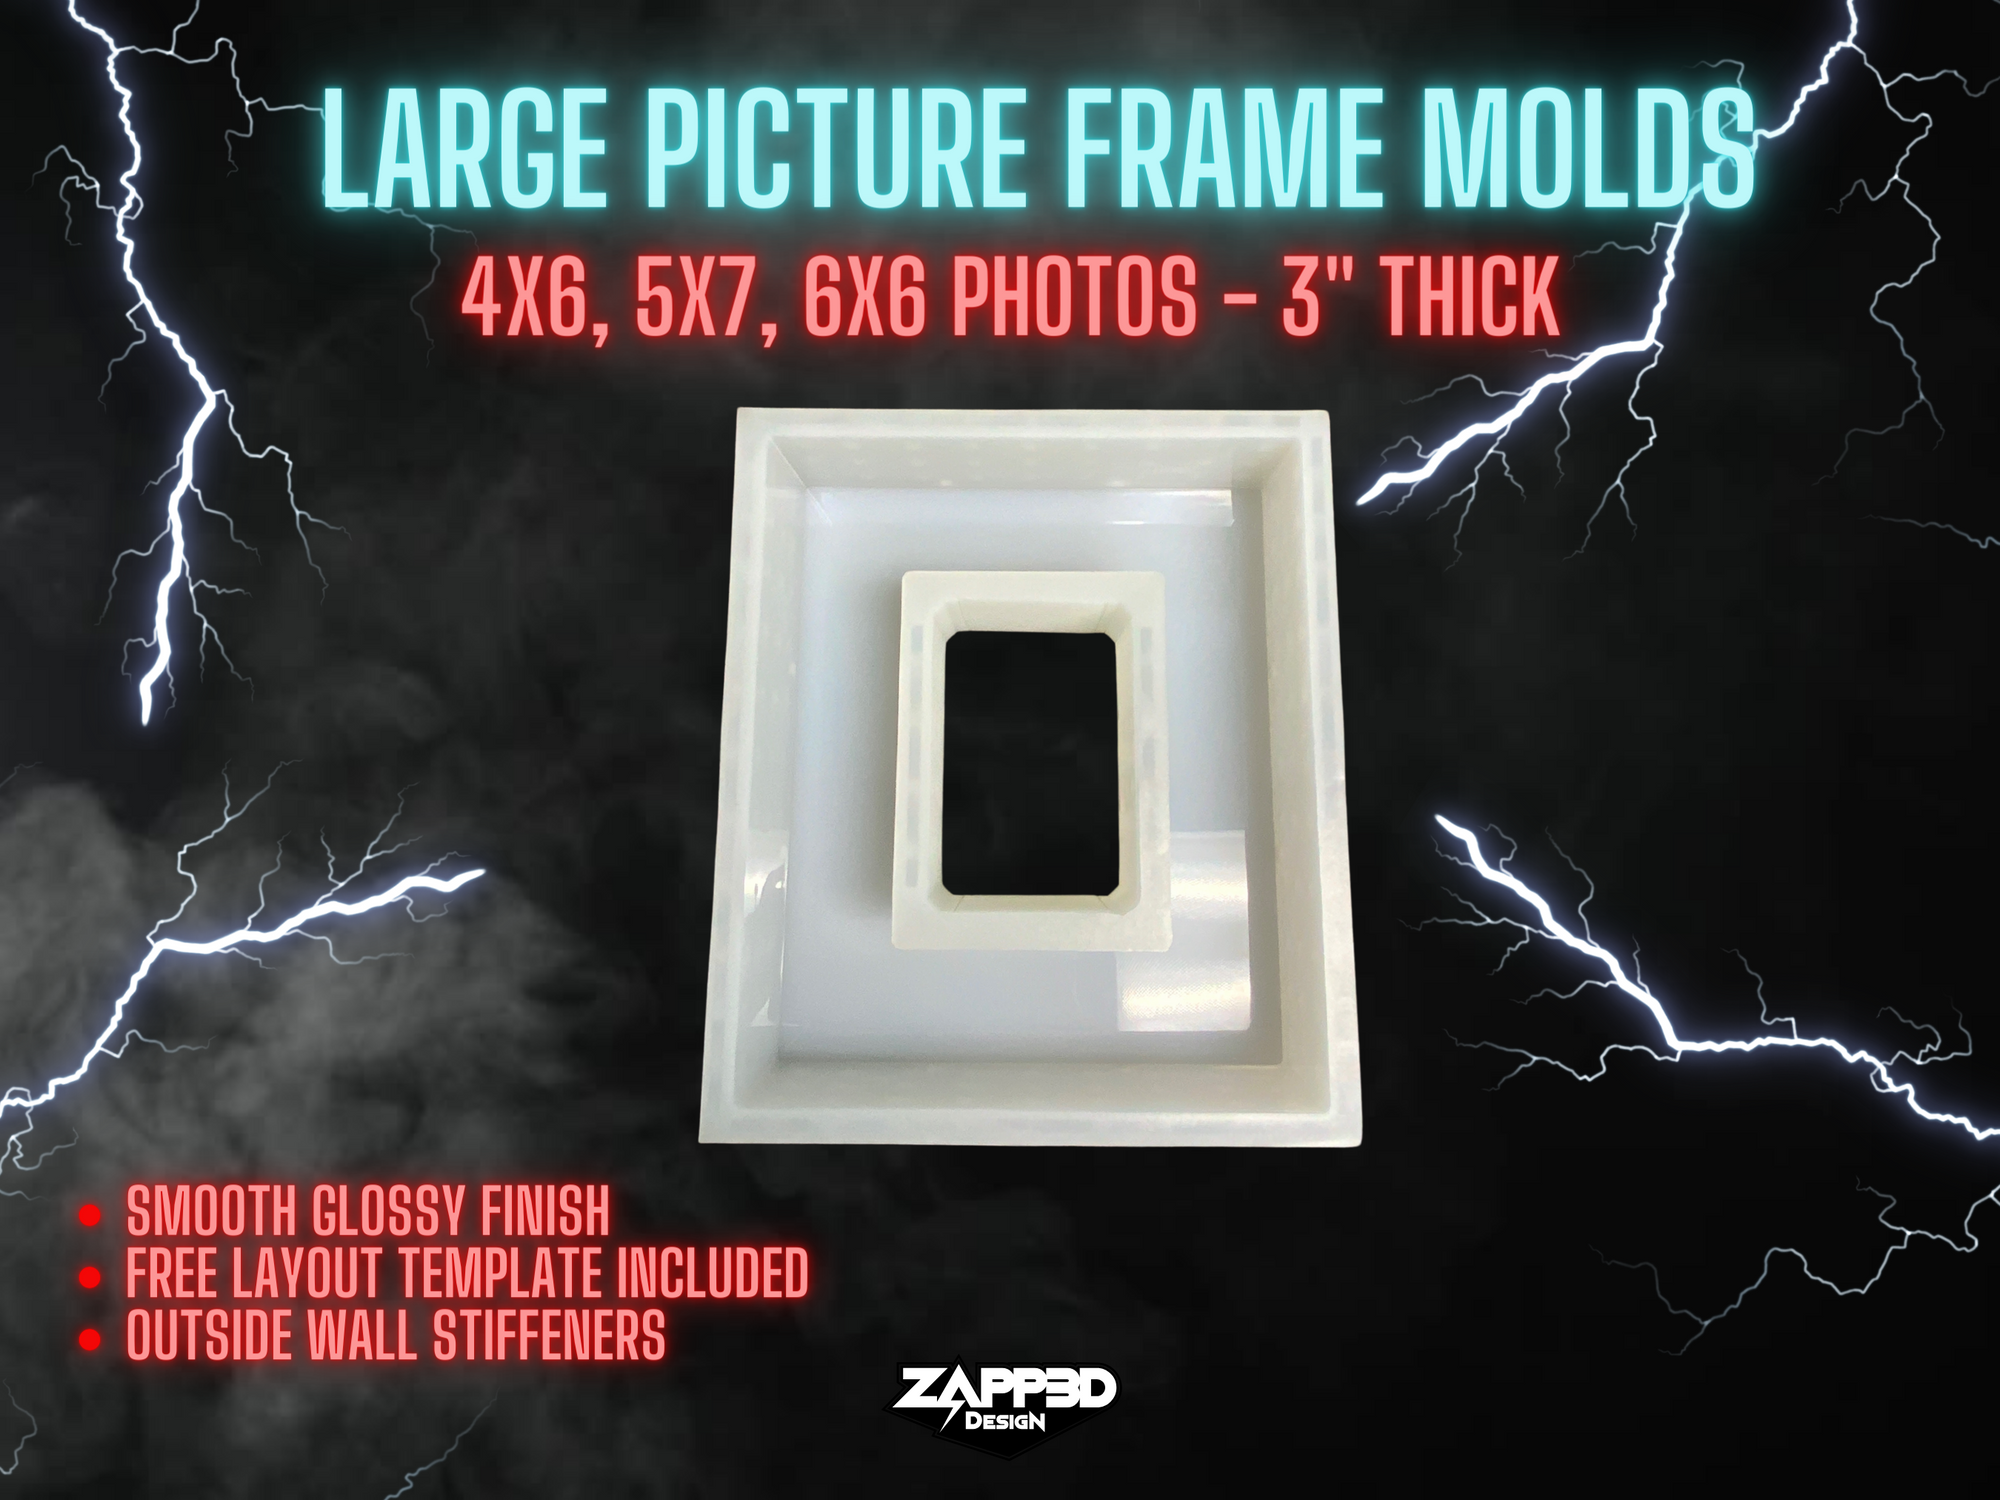 Picture Frame Mold | 3" Thick | 3 Sizes | Frame Mold, Deep Frame Mold, Large Picture Frame Mold, Photo Frame Mold